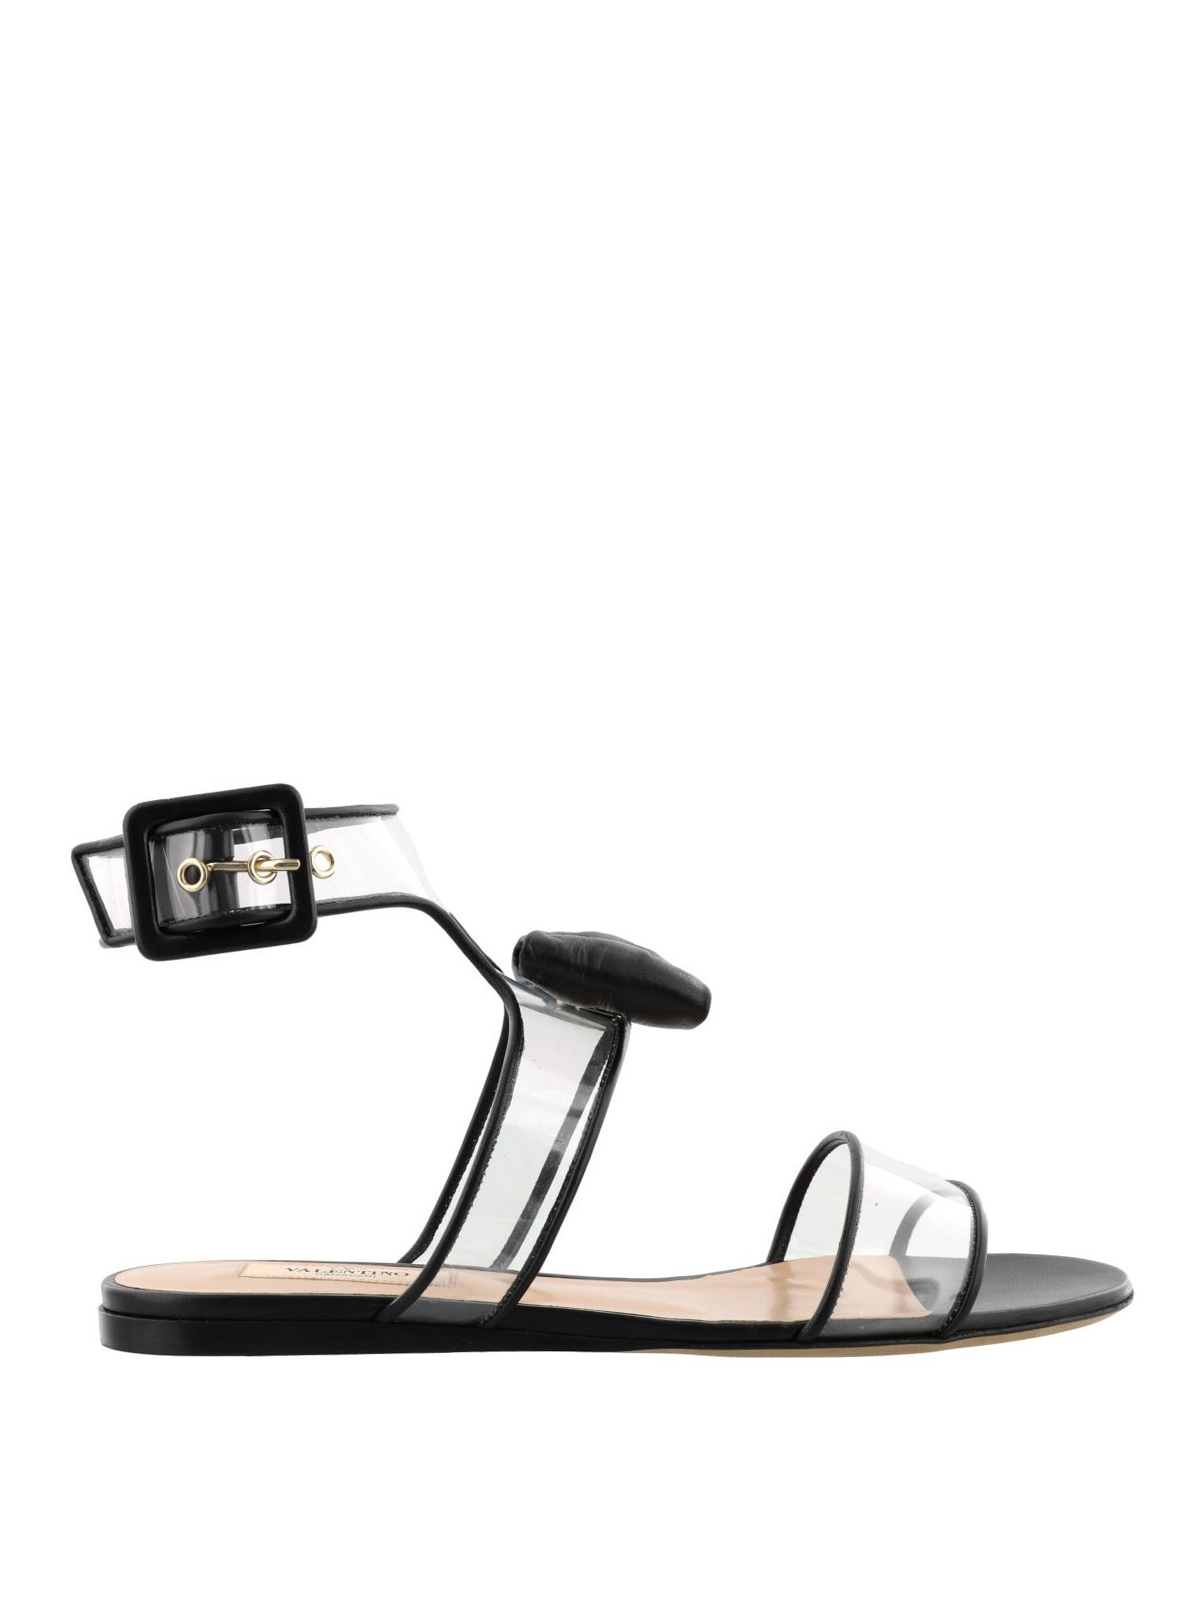 valentino dolly bow sandals